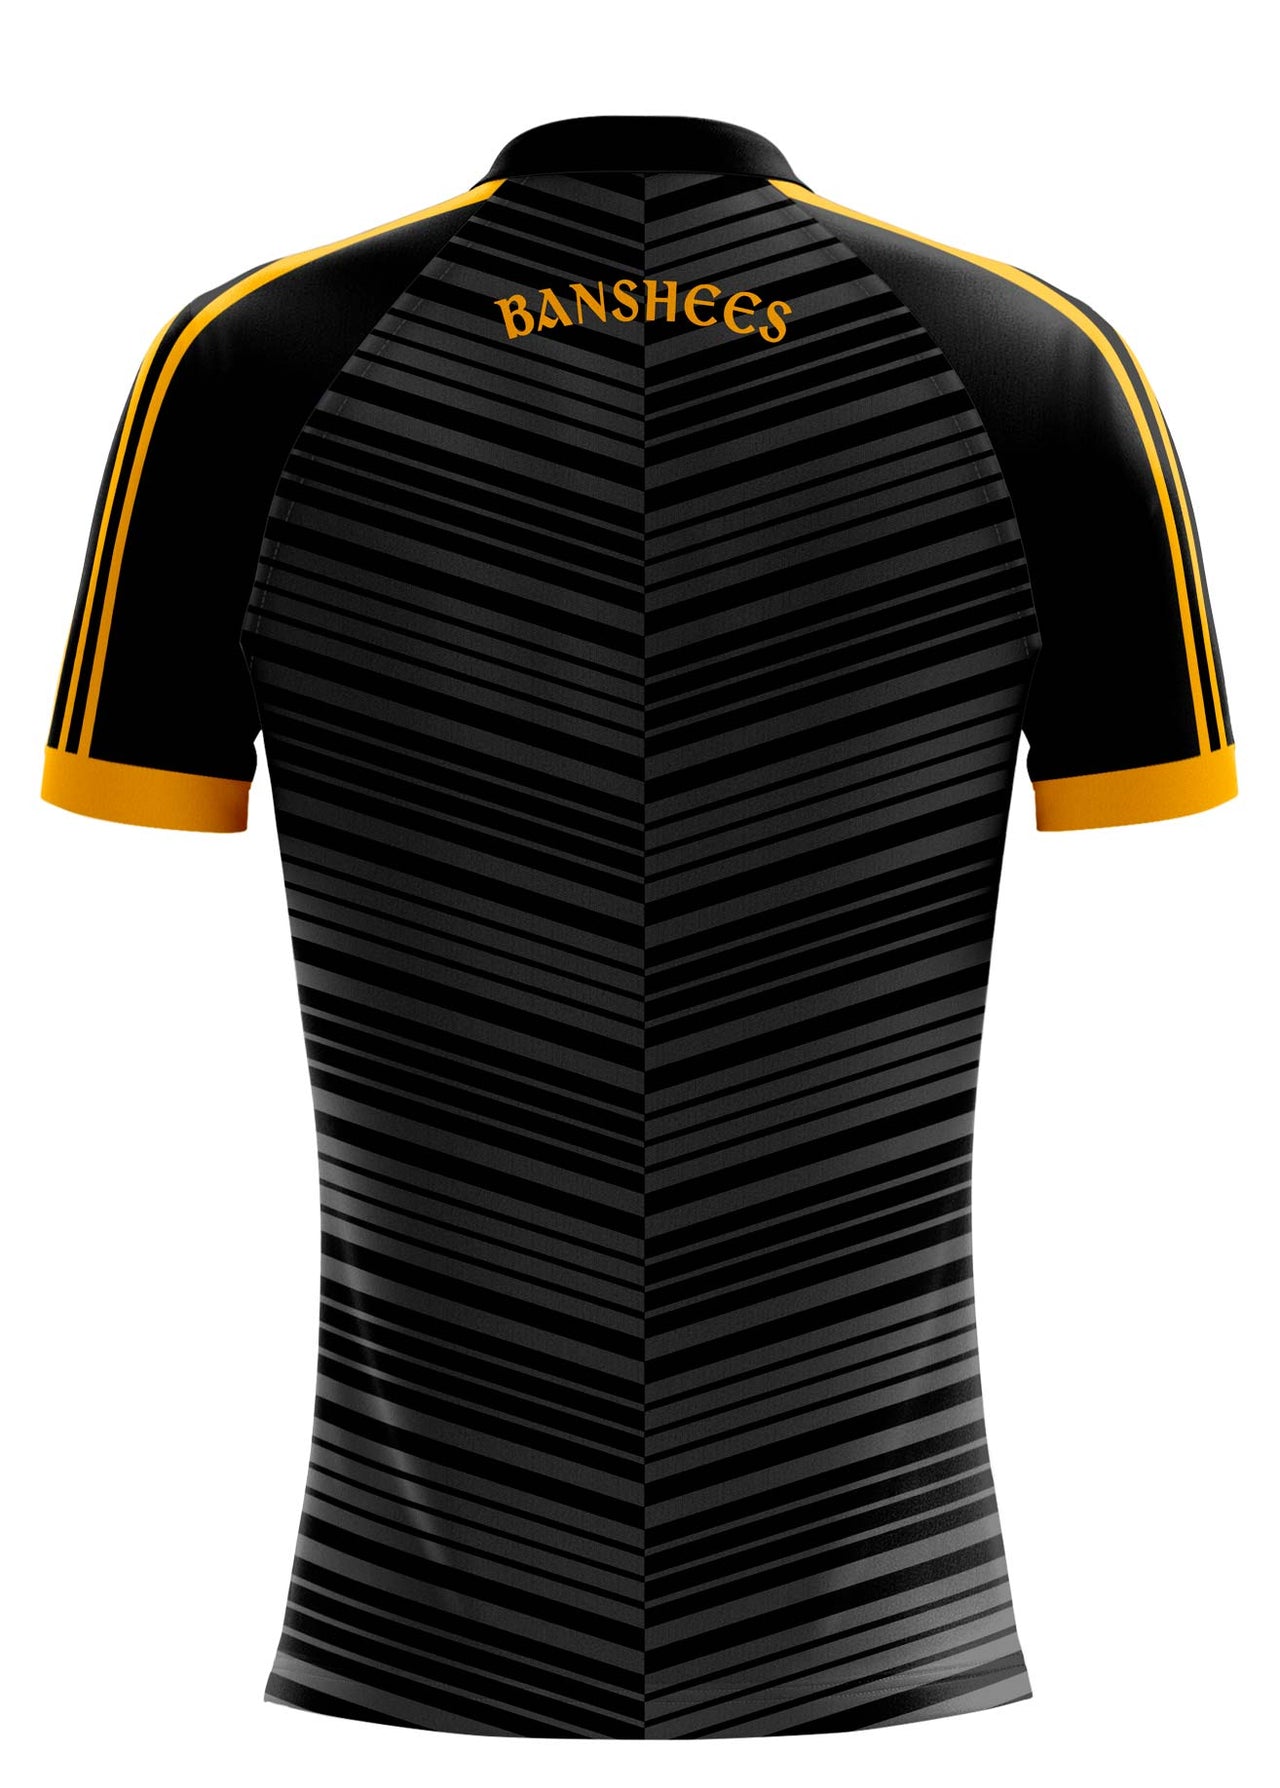 Pittsburgh Banshees Away Jersey Player Fit Adult